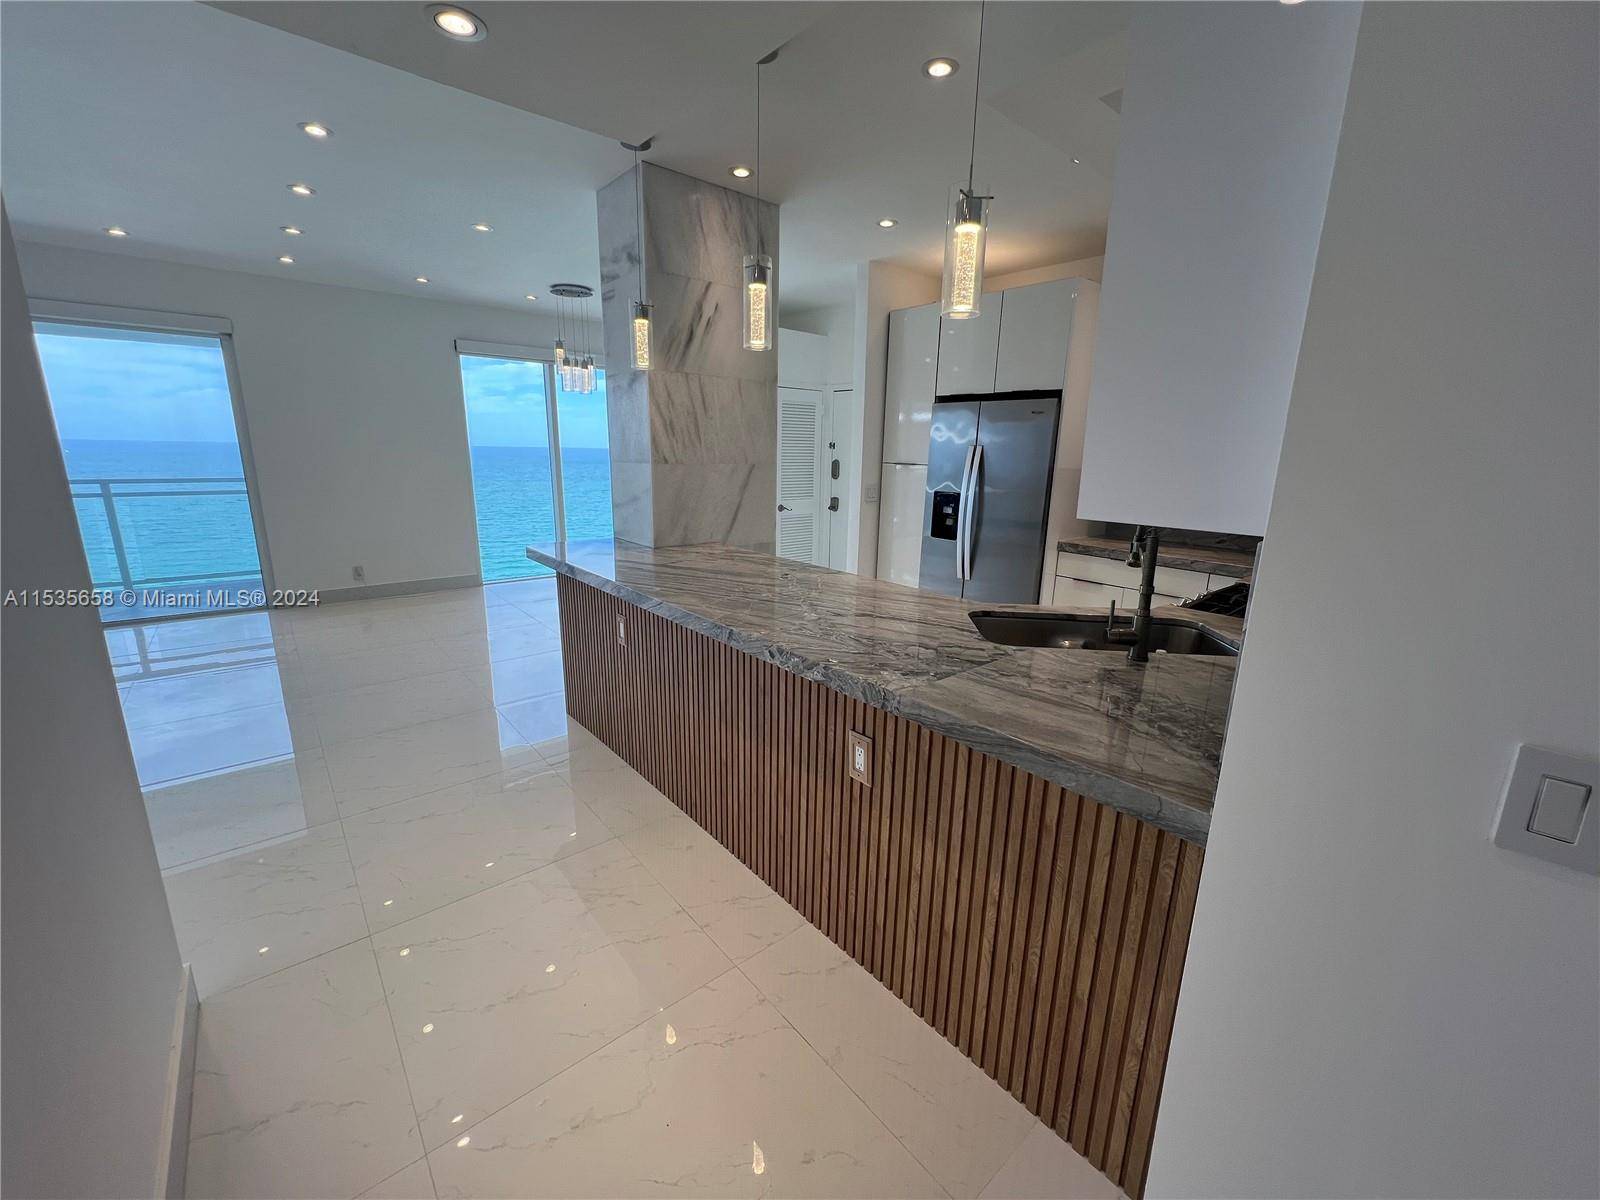 Completely remodeled Penthouse with unobstructed direct Ocean views.